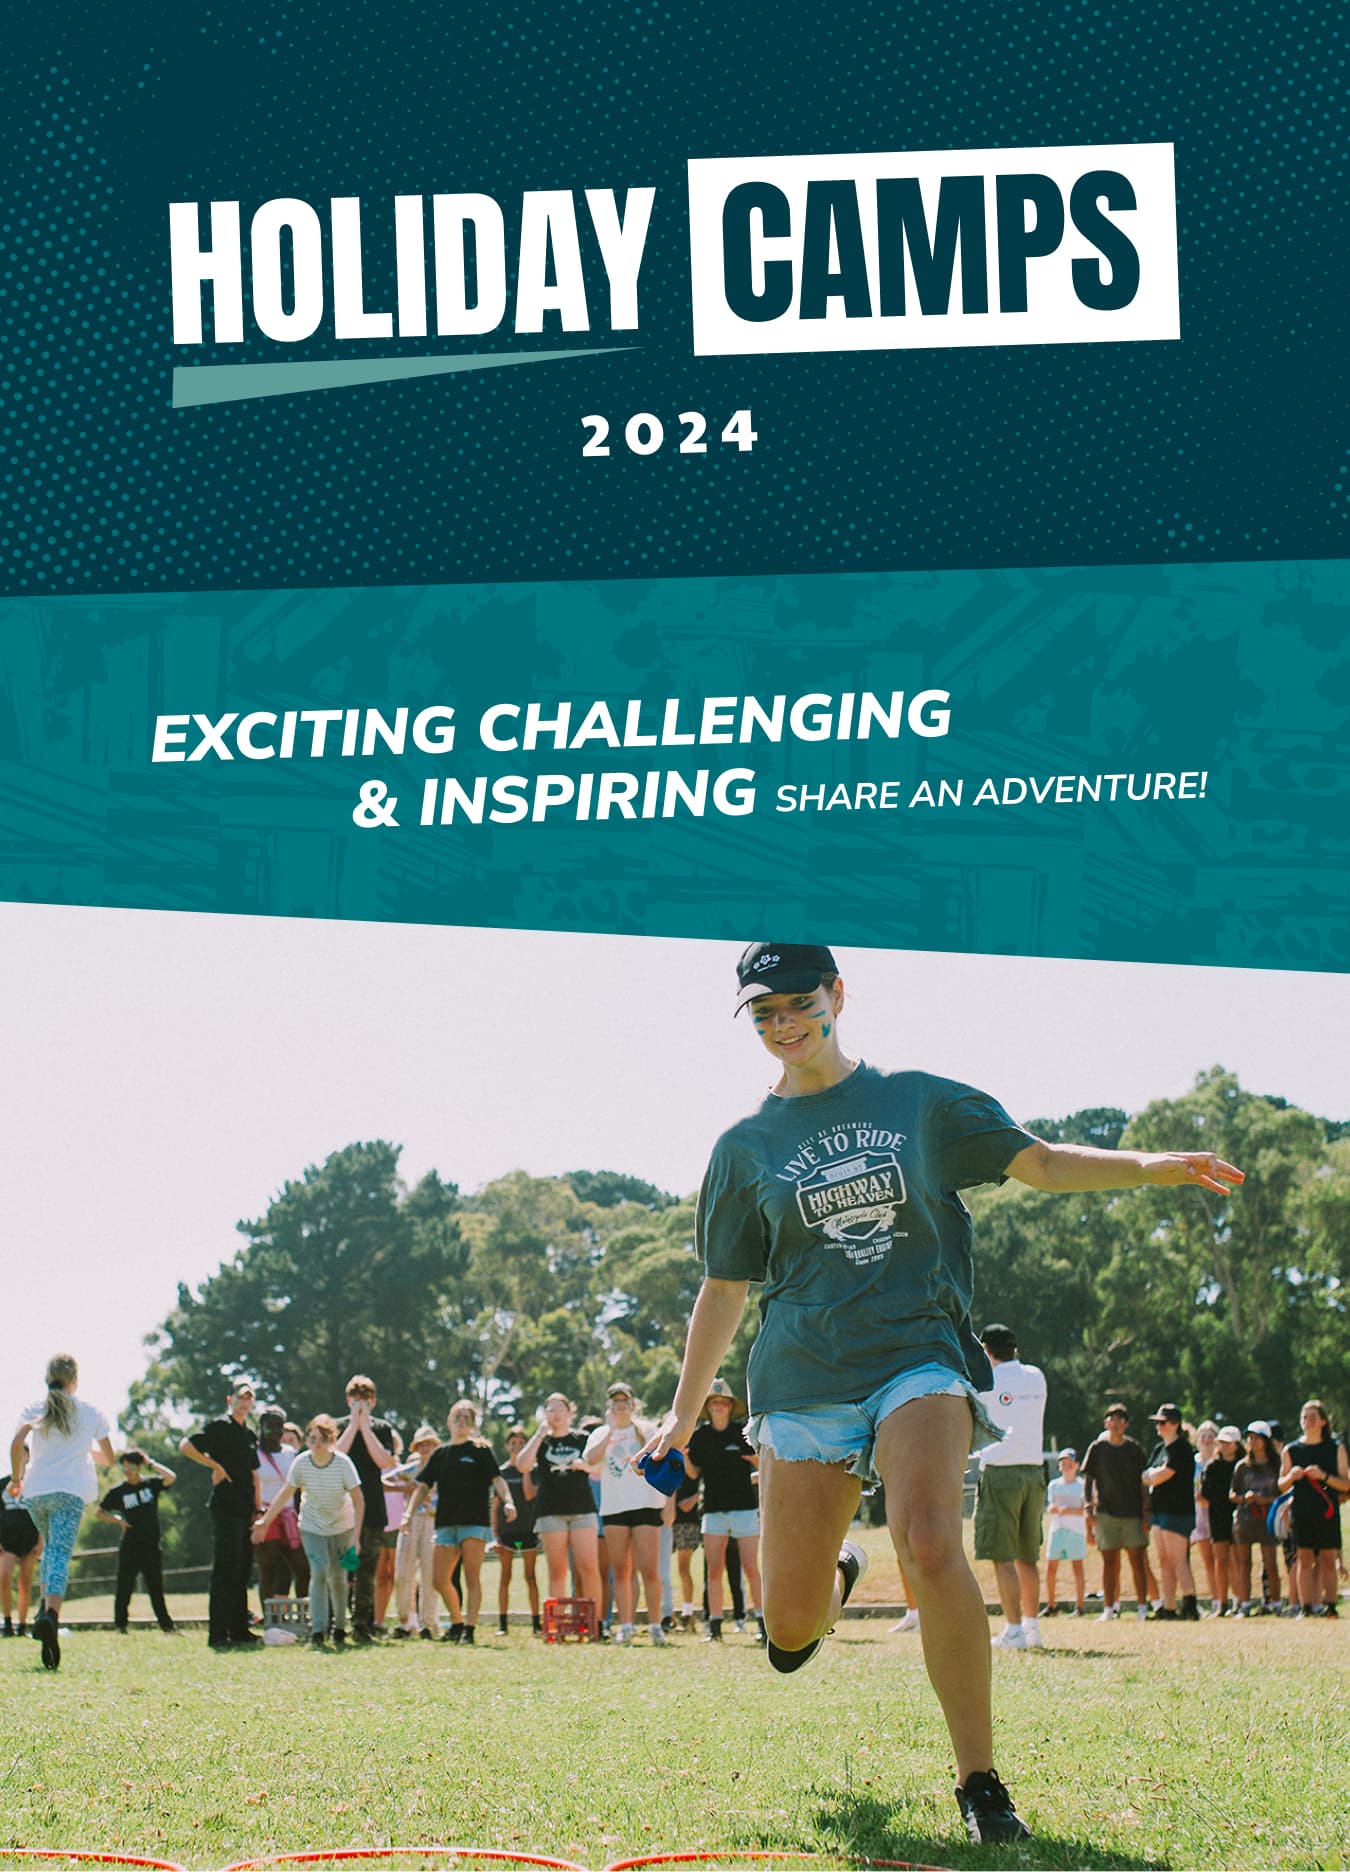 Holiday camps web banner with holiday camps logo, 2024 & the text EXCITING, CHALLENING, INSPIRING. Next to a girl with blue face paint playing field games at Holiday camps on the Mornington Peninsula - mobile